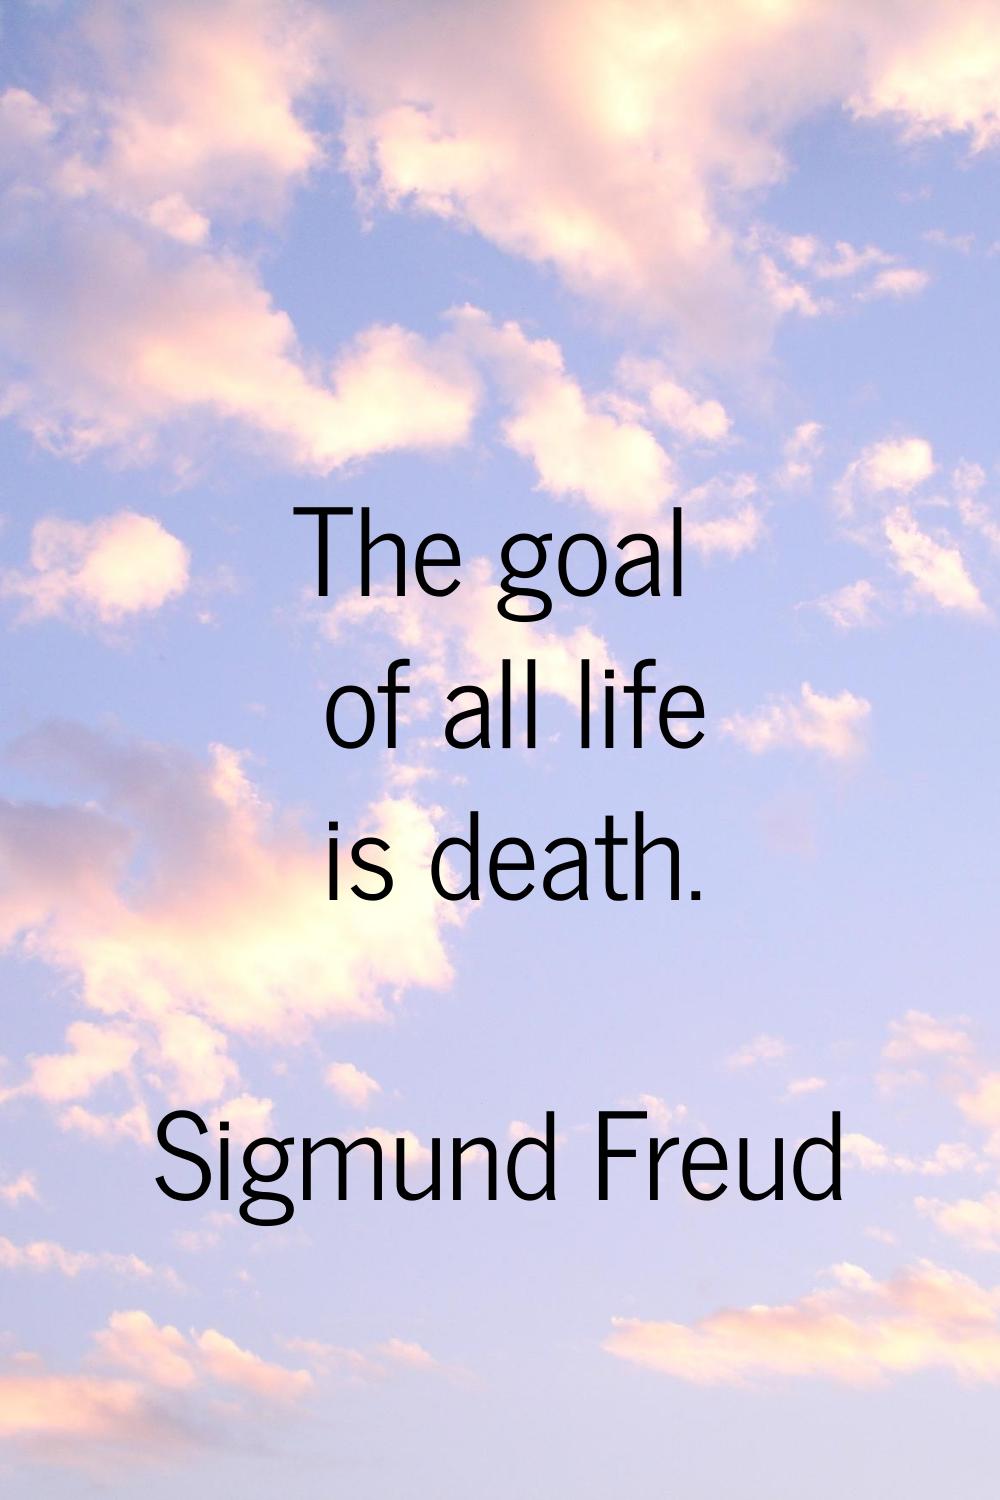 The goal of all life is death.